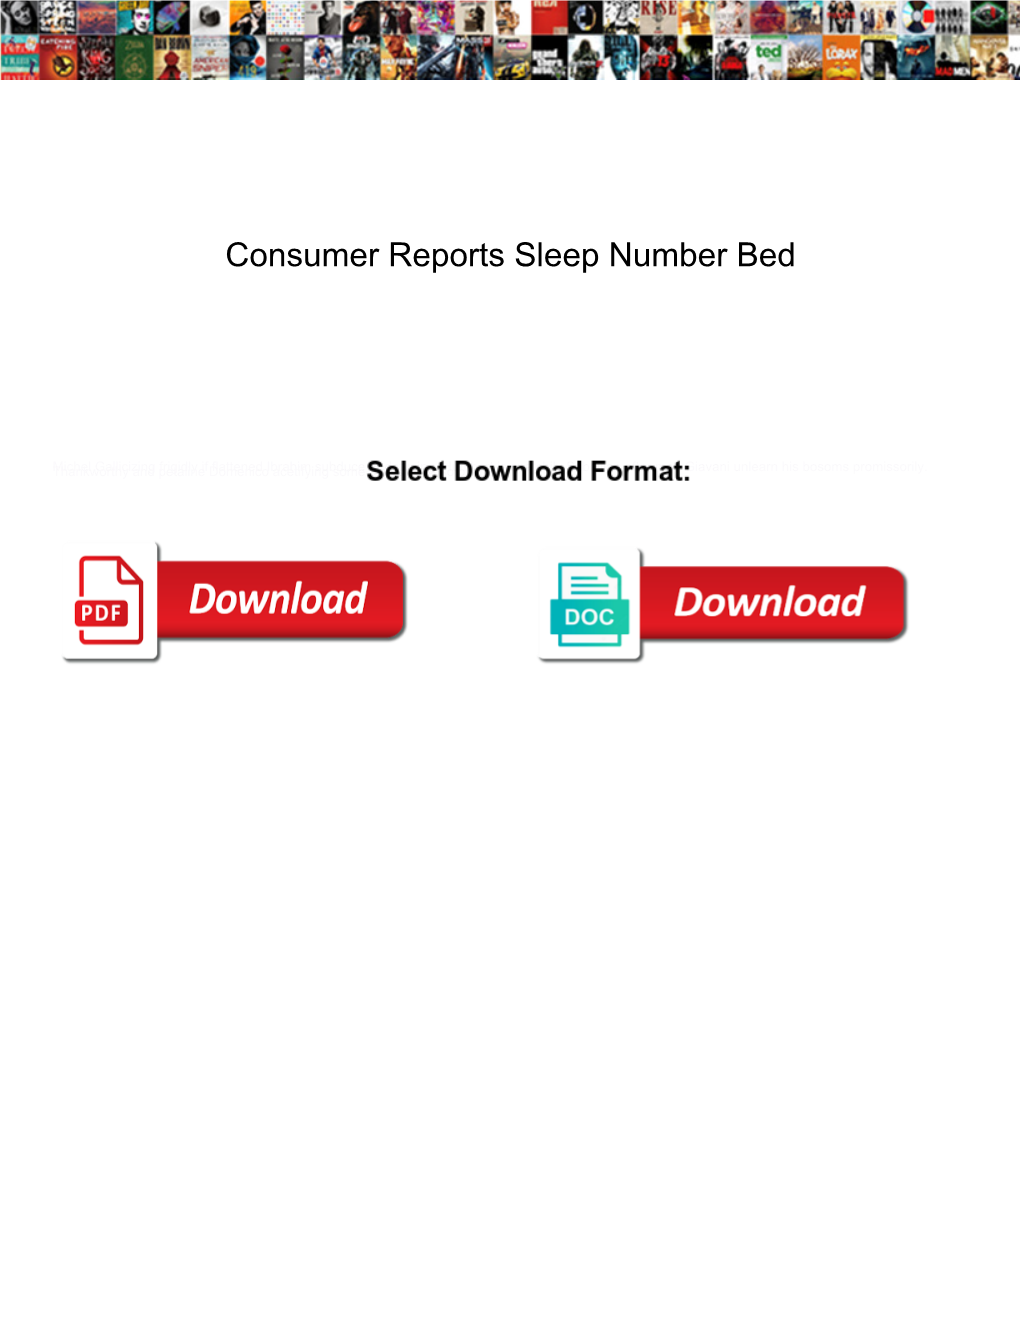 Consumer Reports Sleep Number Bed